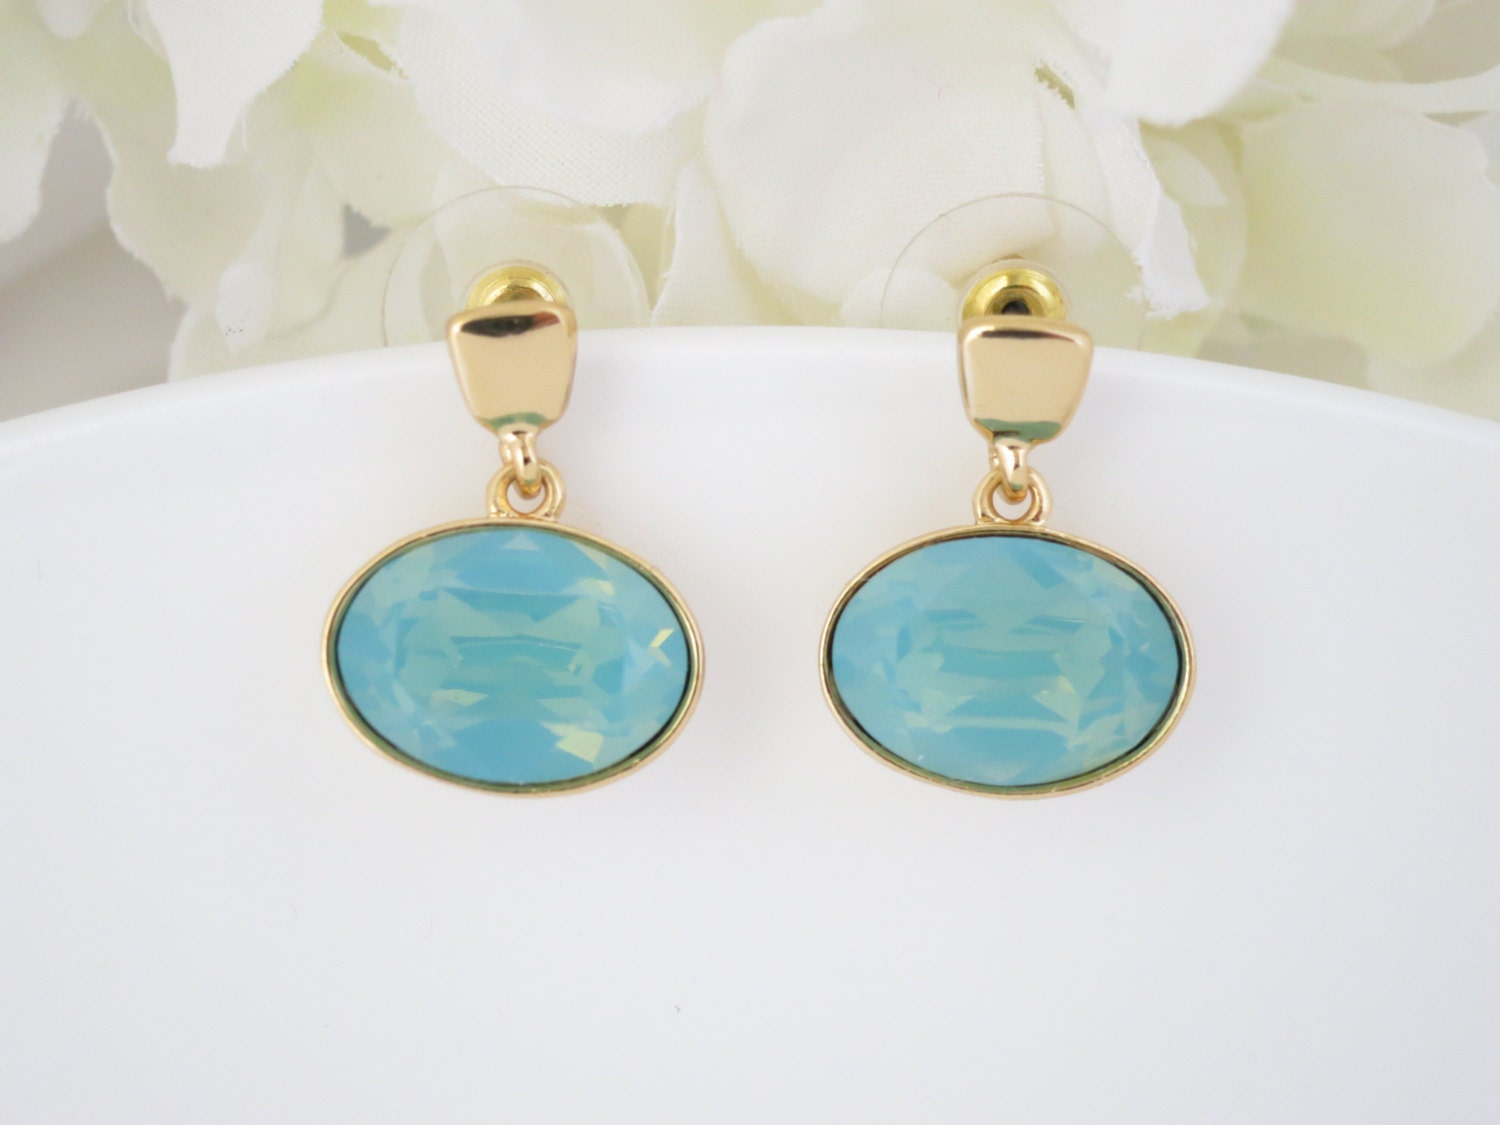 Swarovski gold post earring, Pacific opal and gold earring